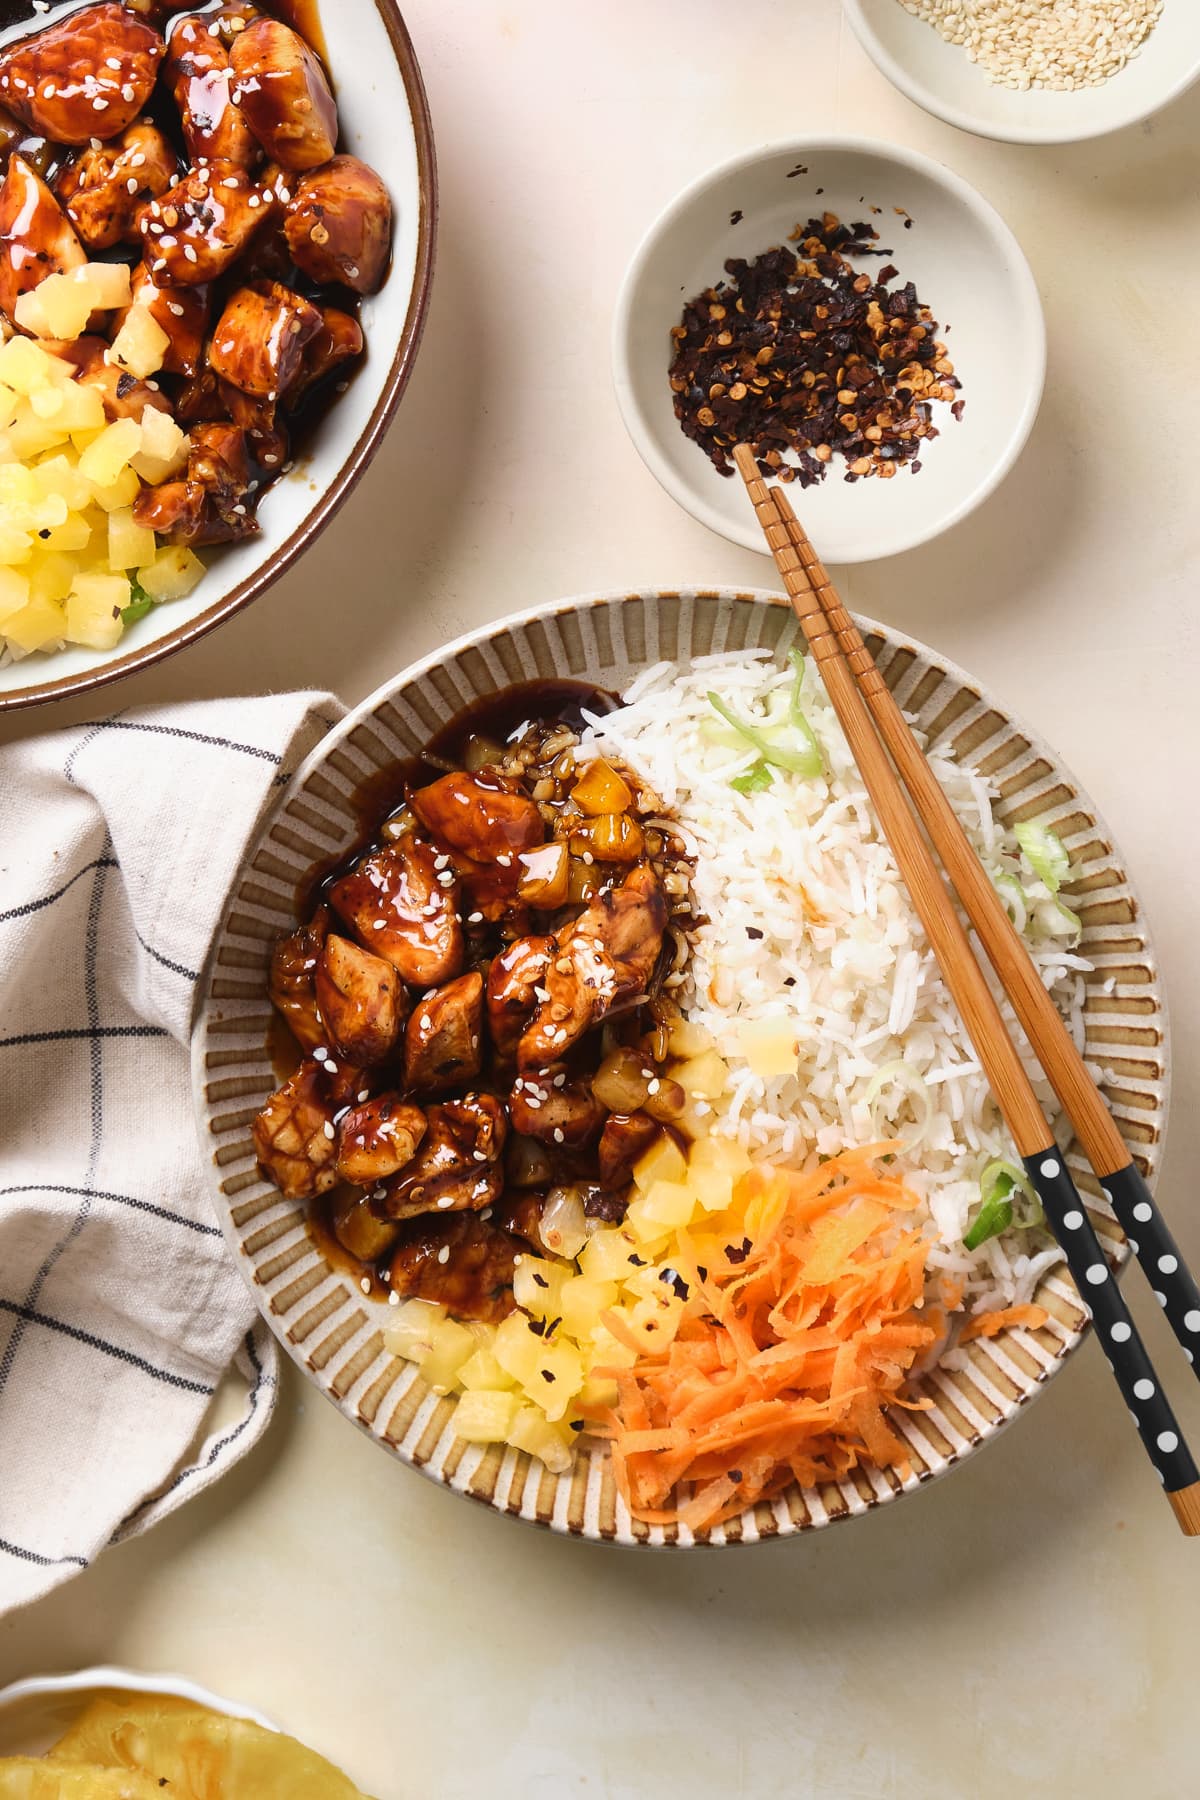 Chopsticks on a bowl with chicken teriyaki, pineapple, carrots, and rice.